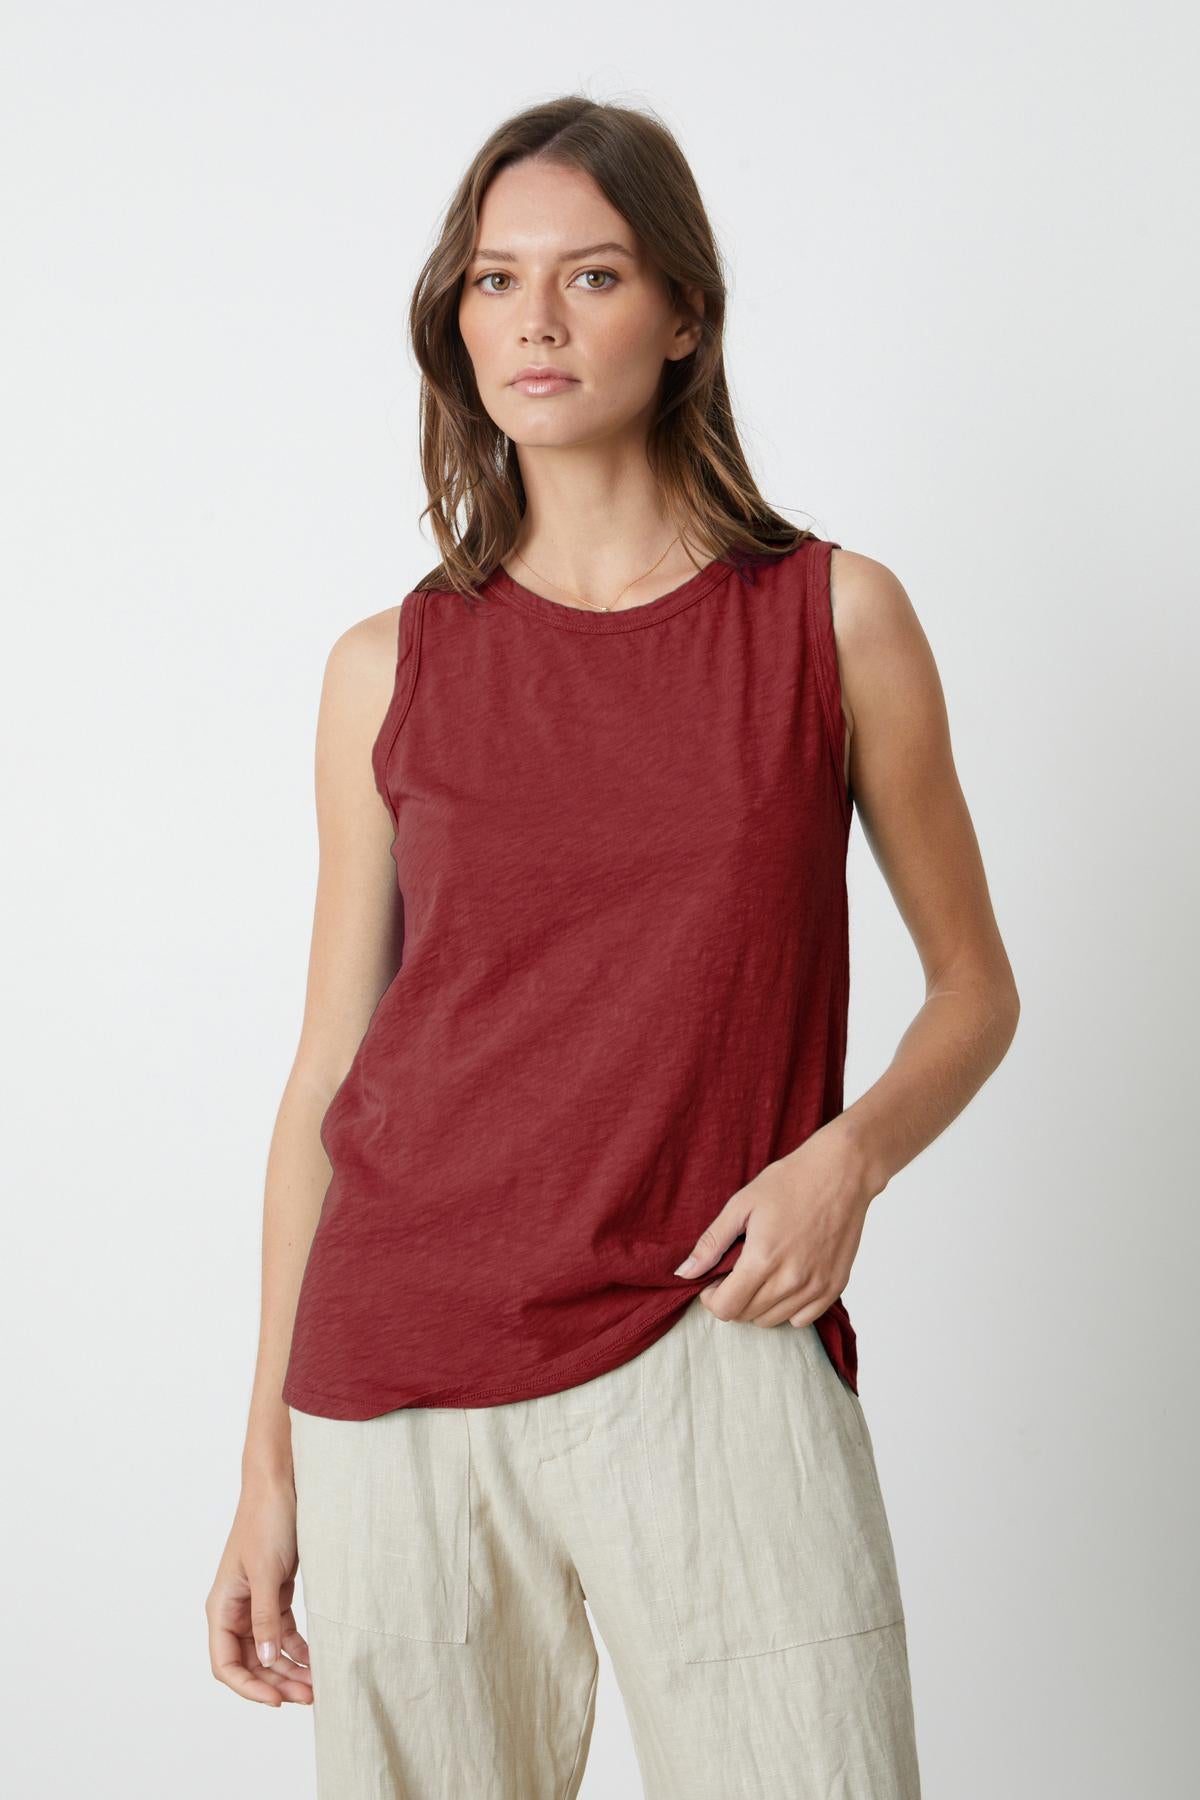 A woman in a burgundy TAURUS COTTON SLUB TANK by Velvet by Graham & Spencer and beige pants, styled in a crew-neck shirt.-35783162265793